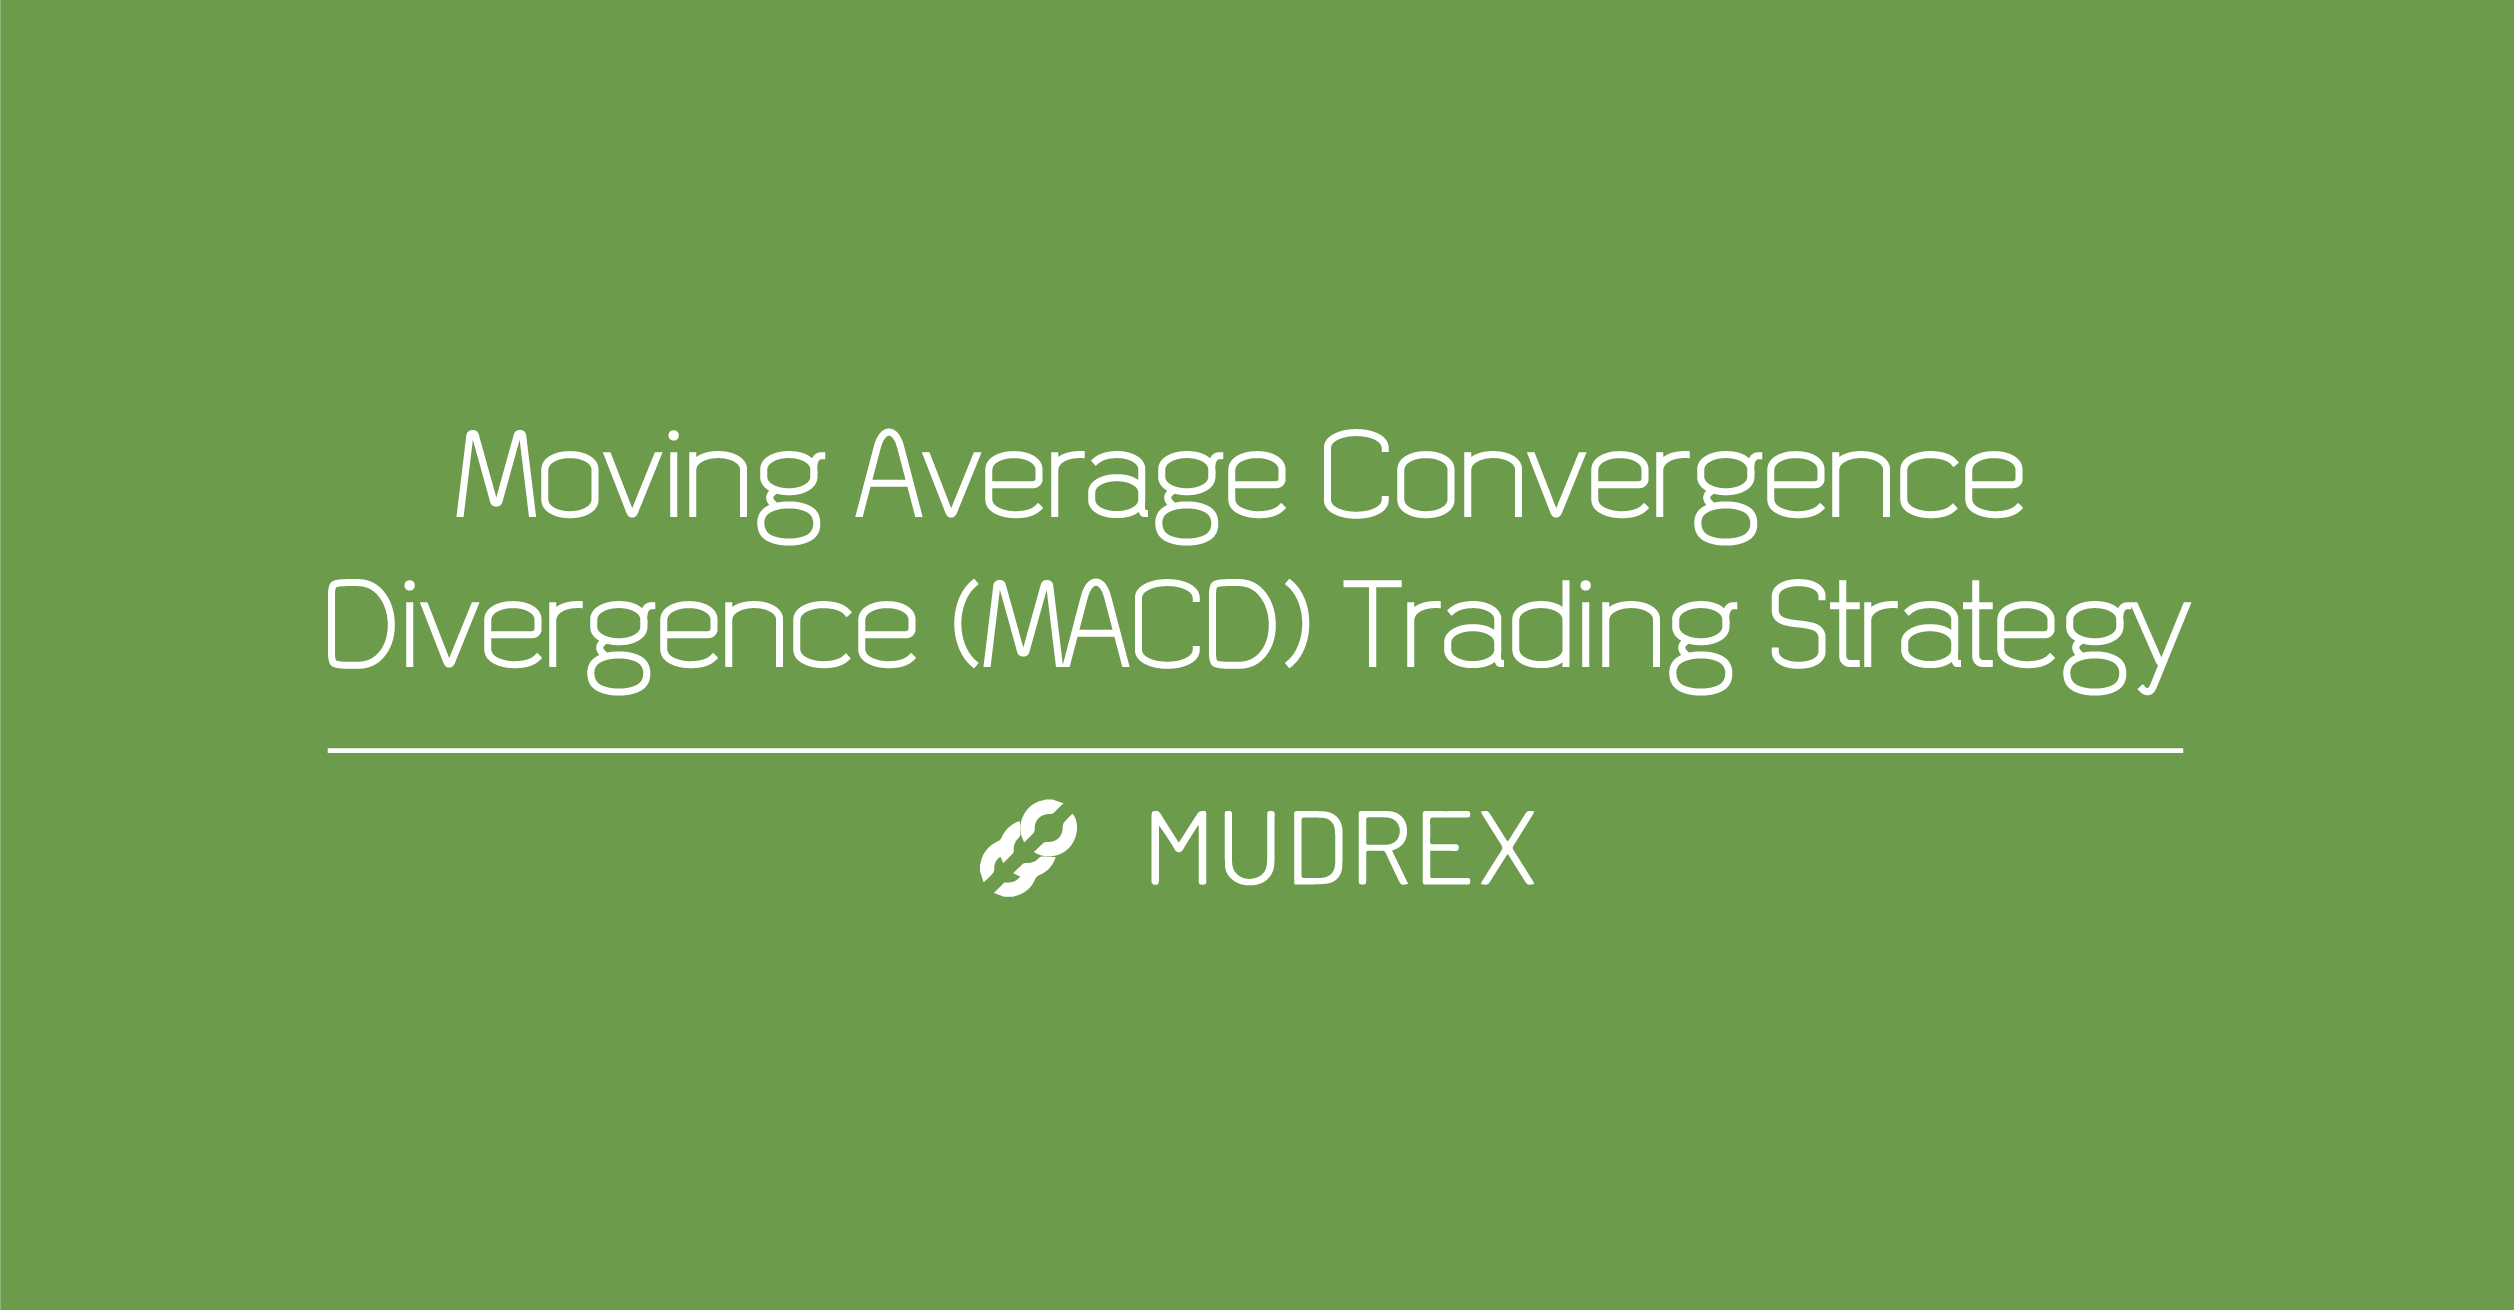 MACD Trading Strategy